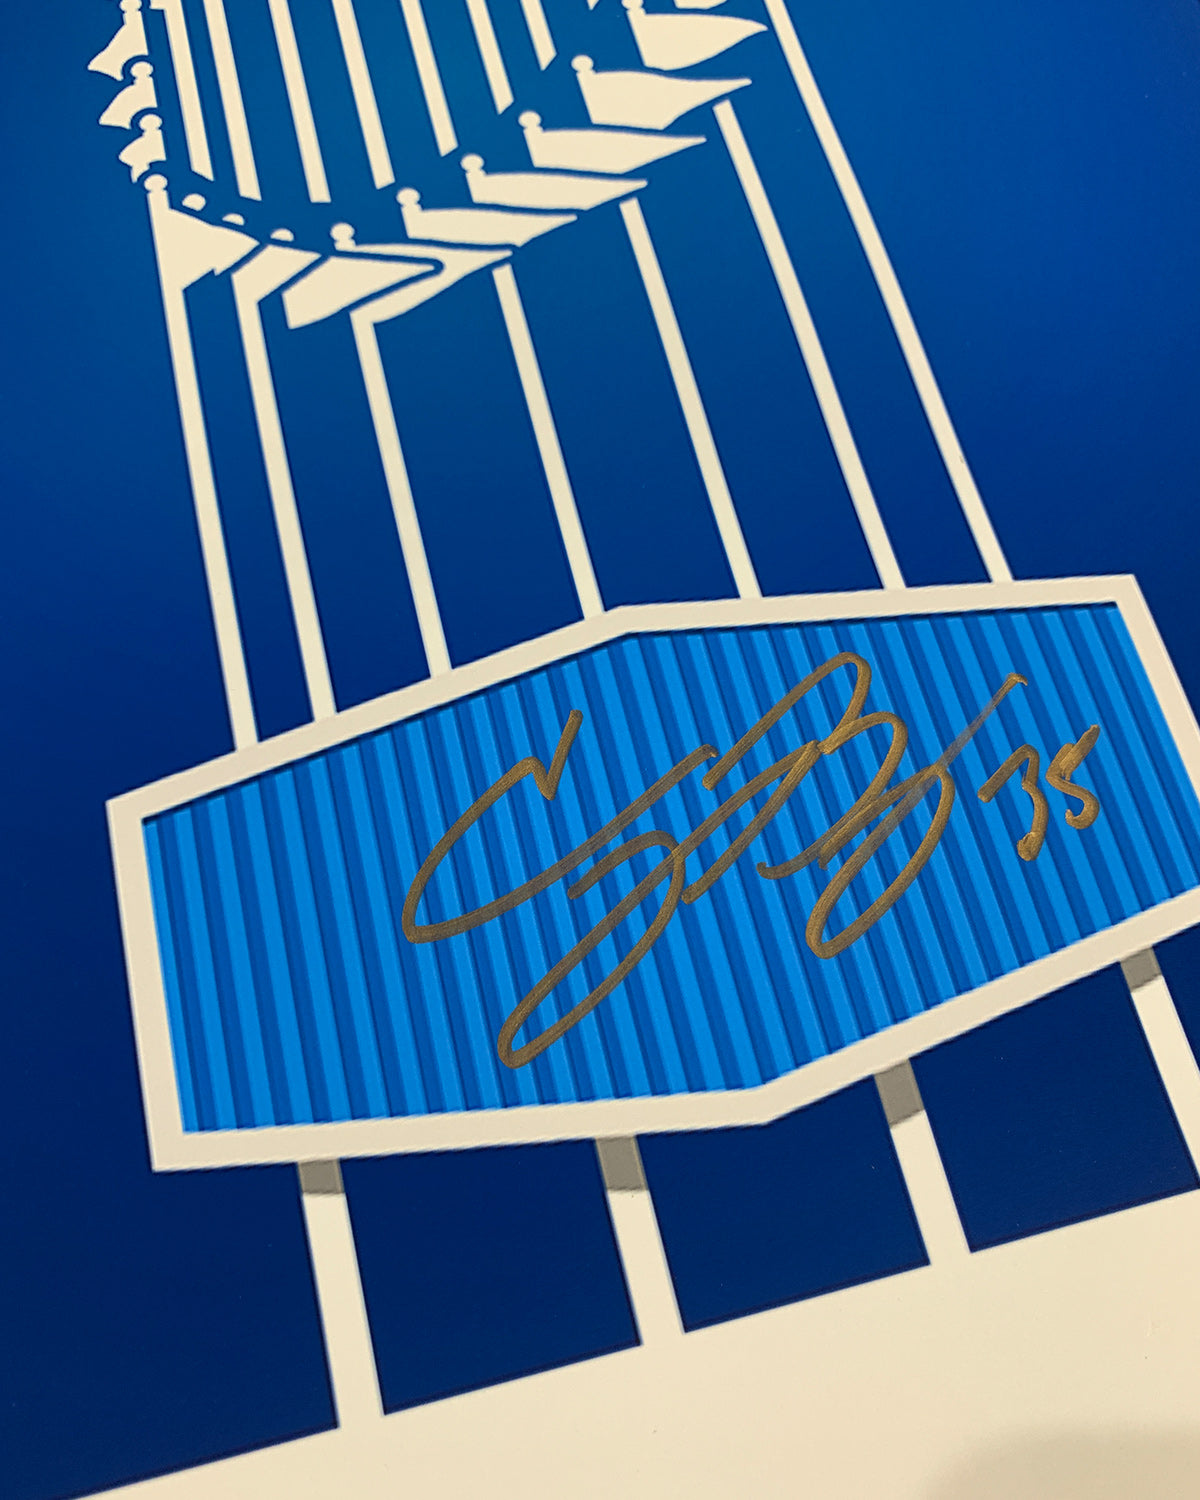 Minimalist World Series 2020 Poster Print - Cody Bellinger Signed - MLB Authenticated